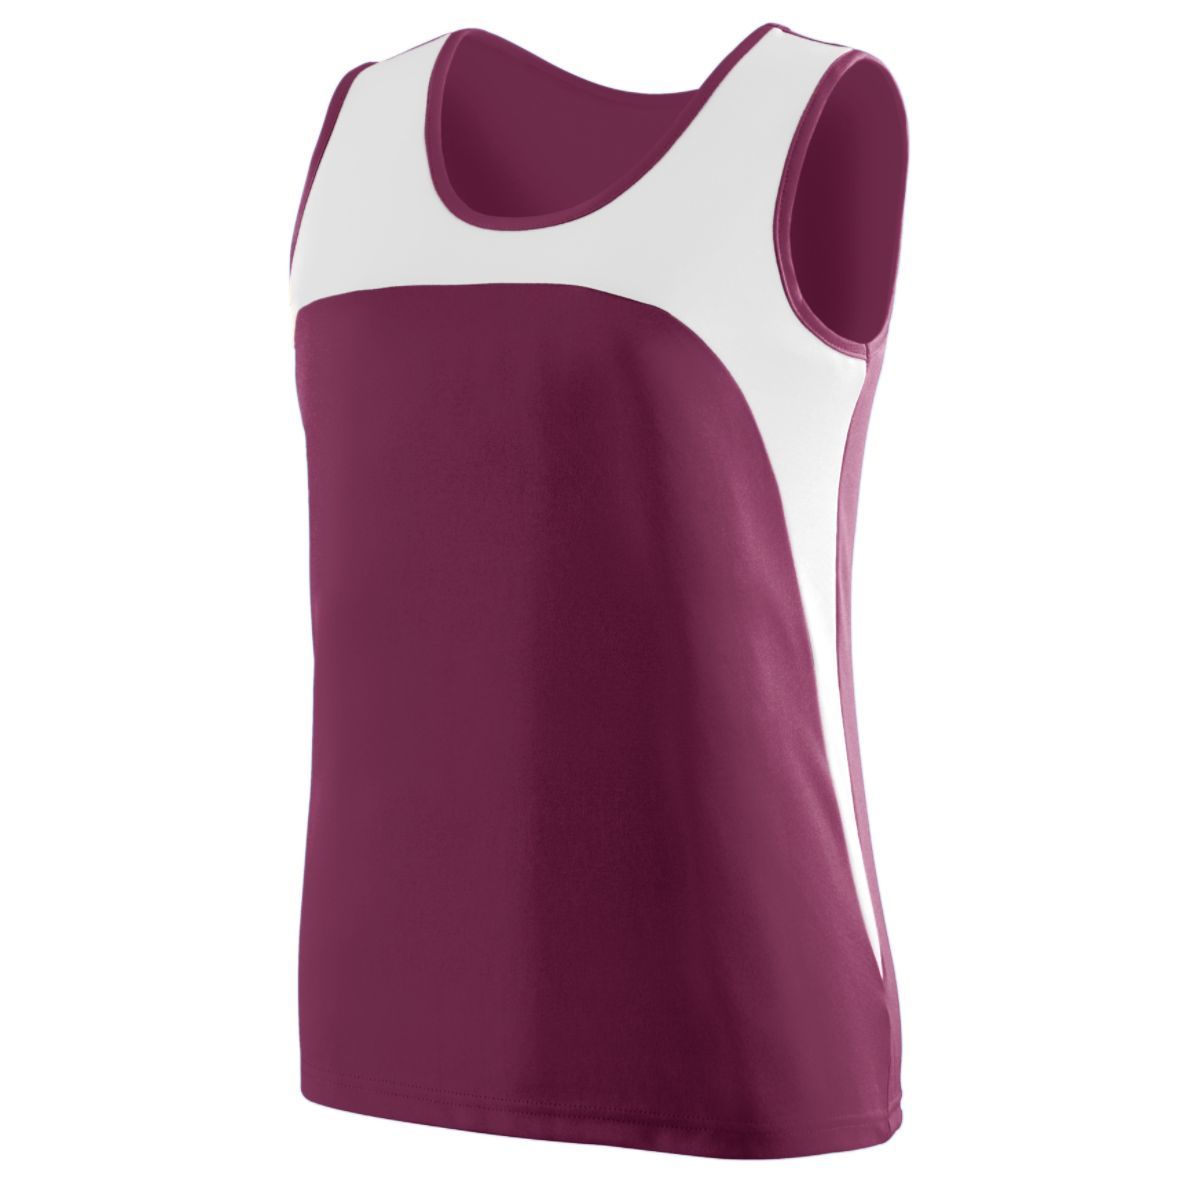 Augusta Sportswear Ladies Rapidpace Track Jersey in Maroon/White  -Part of the Ladies, Ladies-Jersey, Augusta-Products, Track-Field, Shirts product lines at KanaleyCreations.com